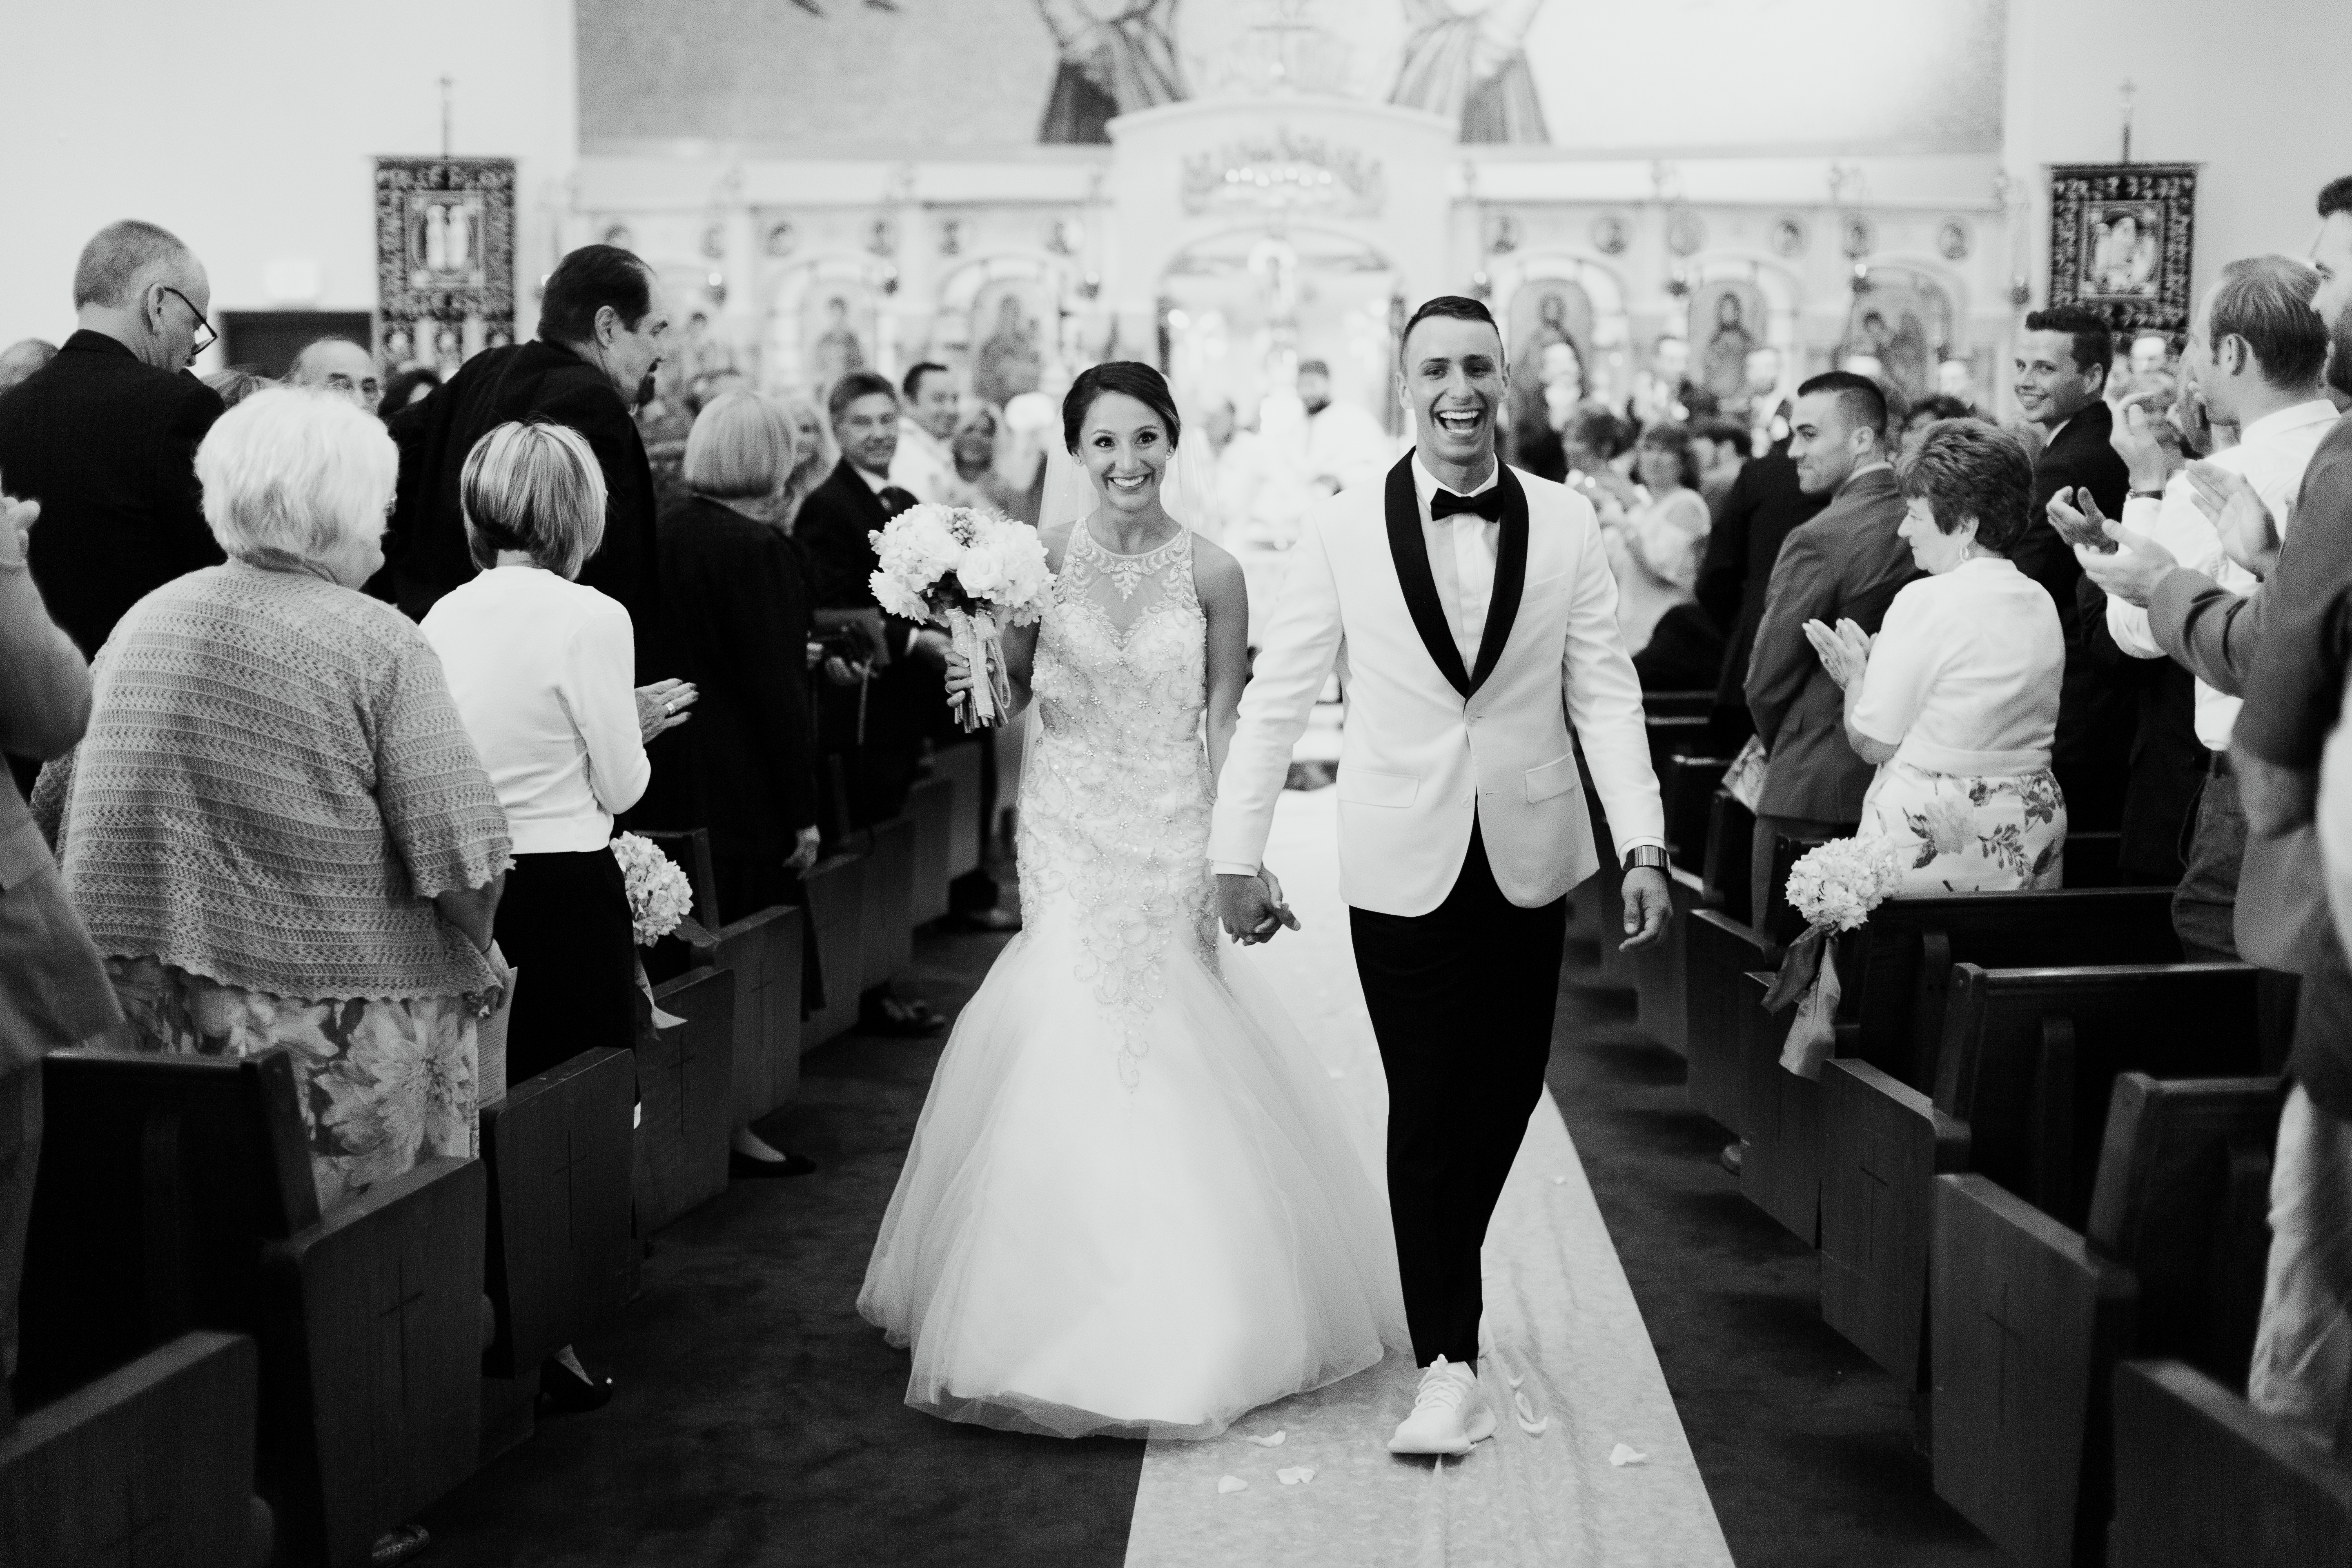 Couple excitedly walk down aisle